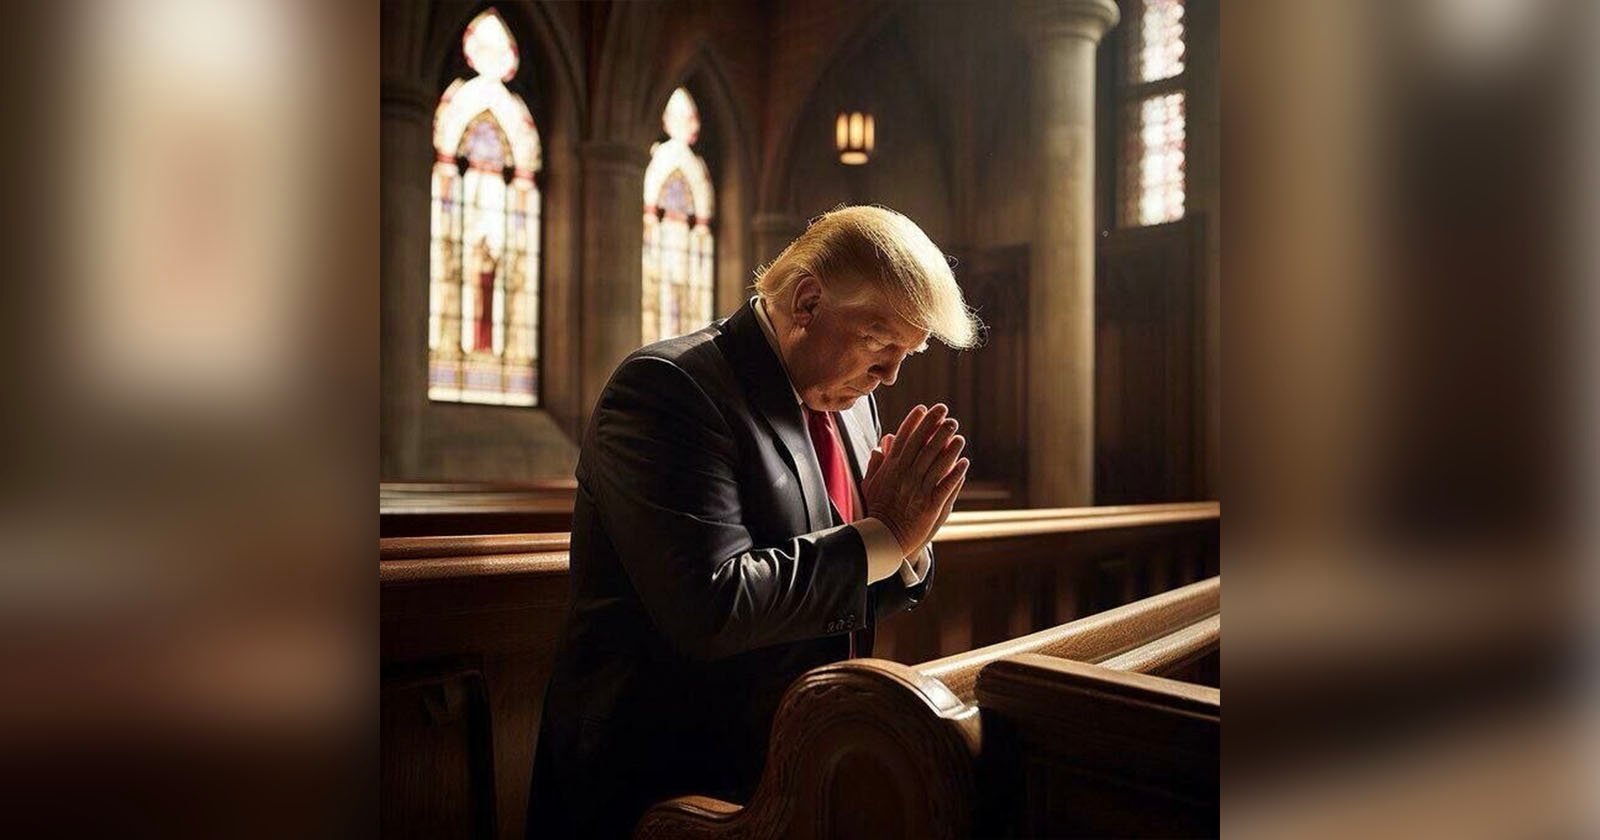 Trump Shares AI Image of Himself Praying With Six Fingers